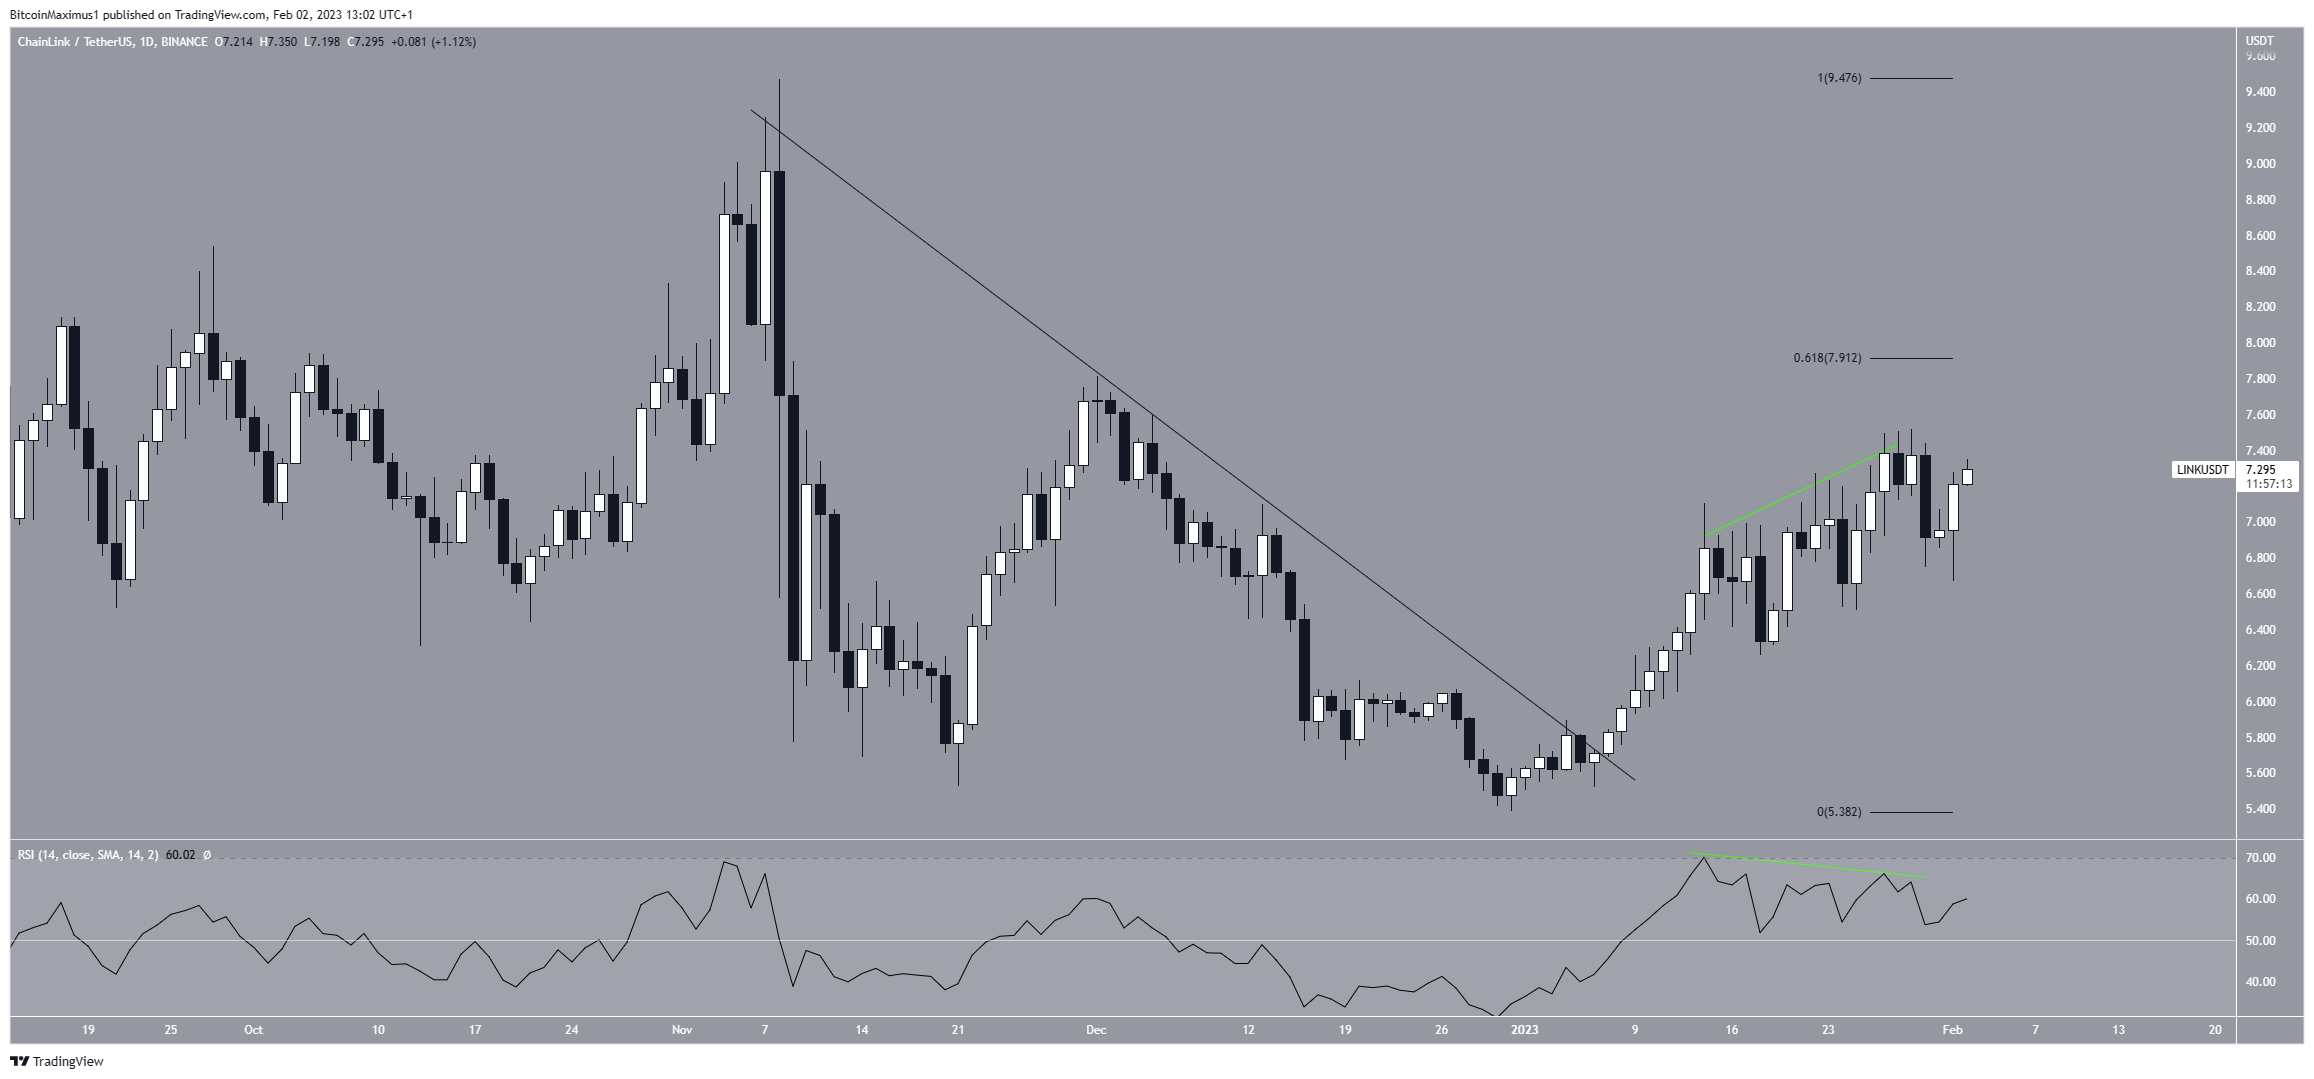 Chainlink (LINK) Price Daily Movement